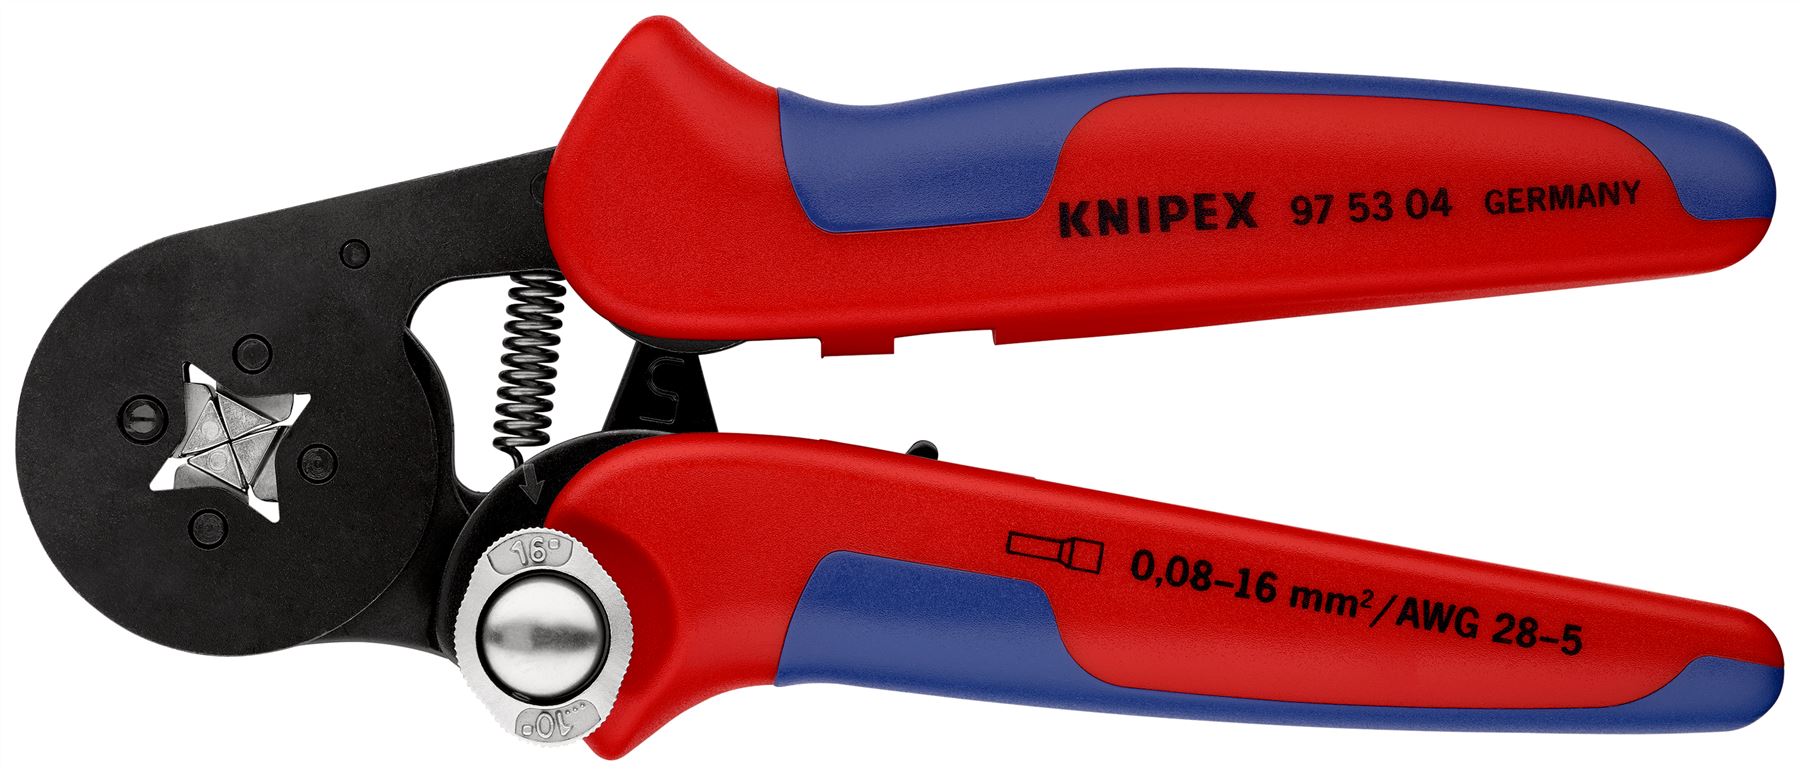 KNIPEX Self Adjusting Crimping Pliers for Wire Ferrules with Lateral Access 0.08-16mm² 180mm Multi Component Grips 97 53 04 SB